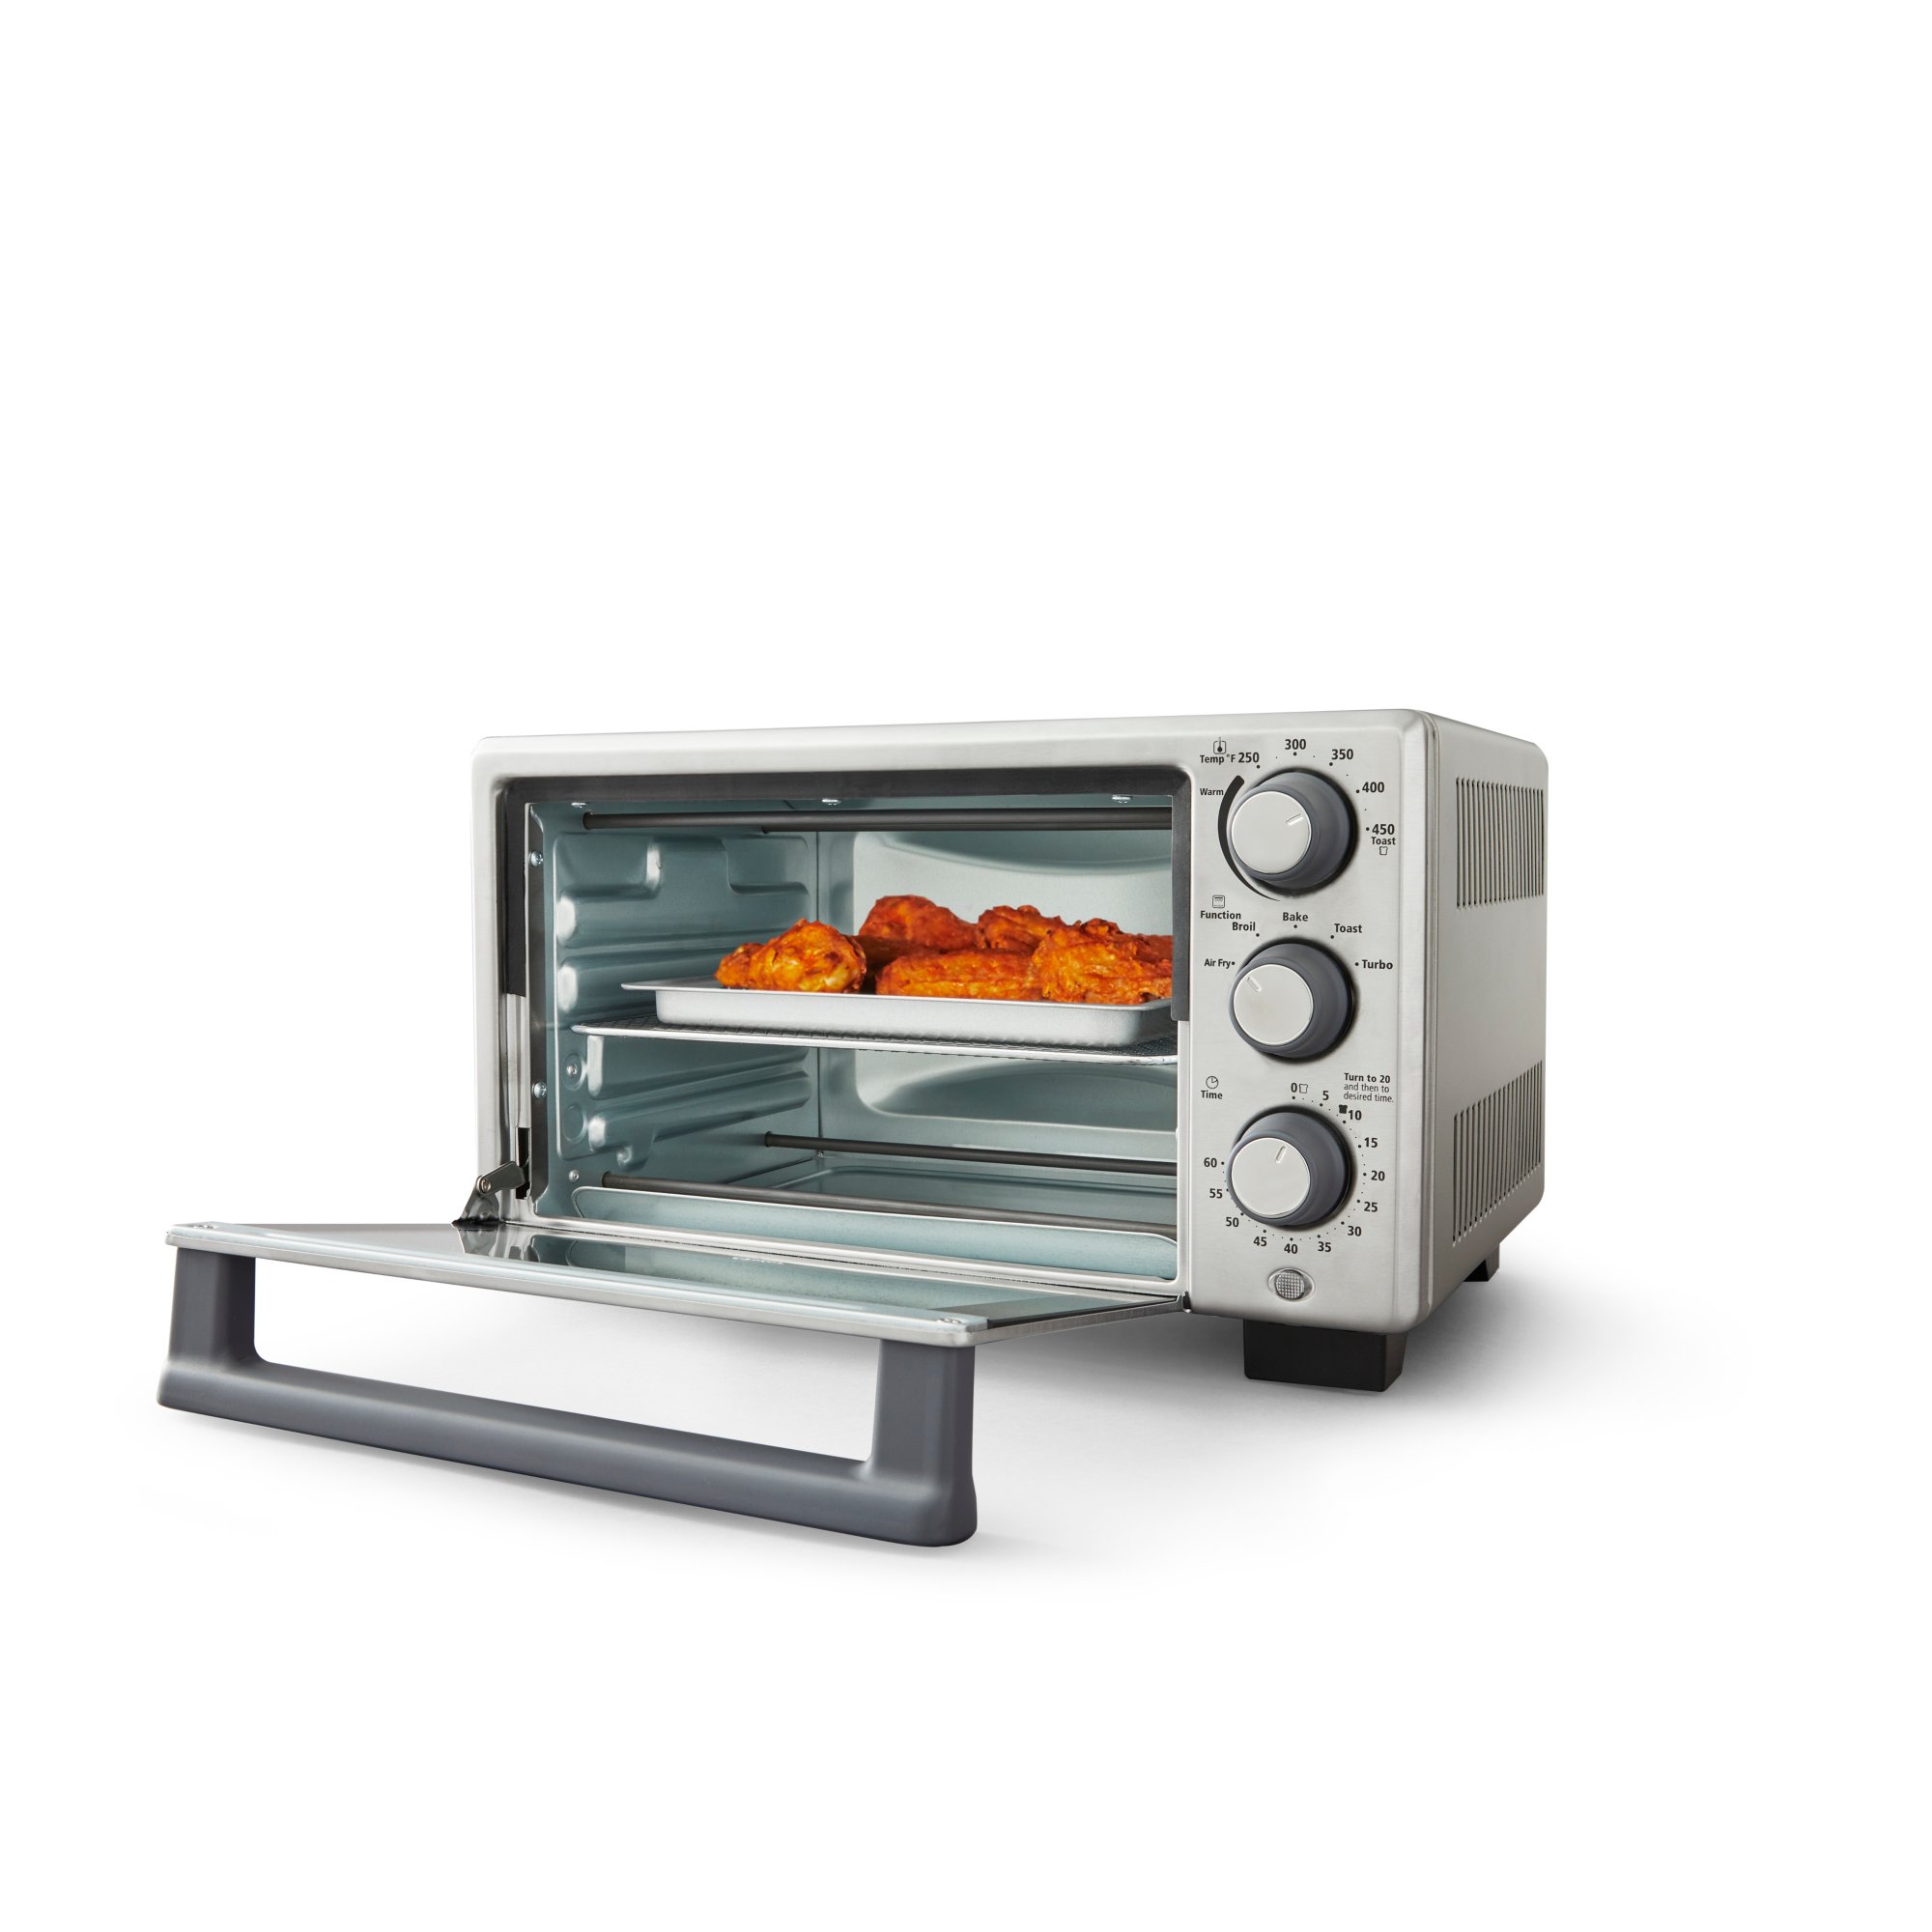 https://s7d9.scene7.com/is/image/NewellRubbermaid/SAP-oster-compact-air-fry-oven-ss-door-opened-with-food-angle?wid=2000&hei=2000